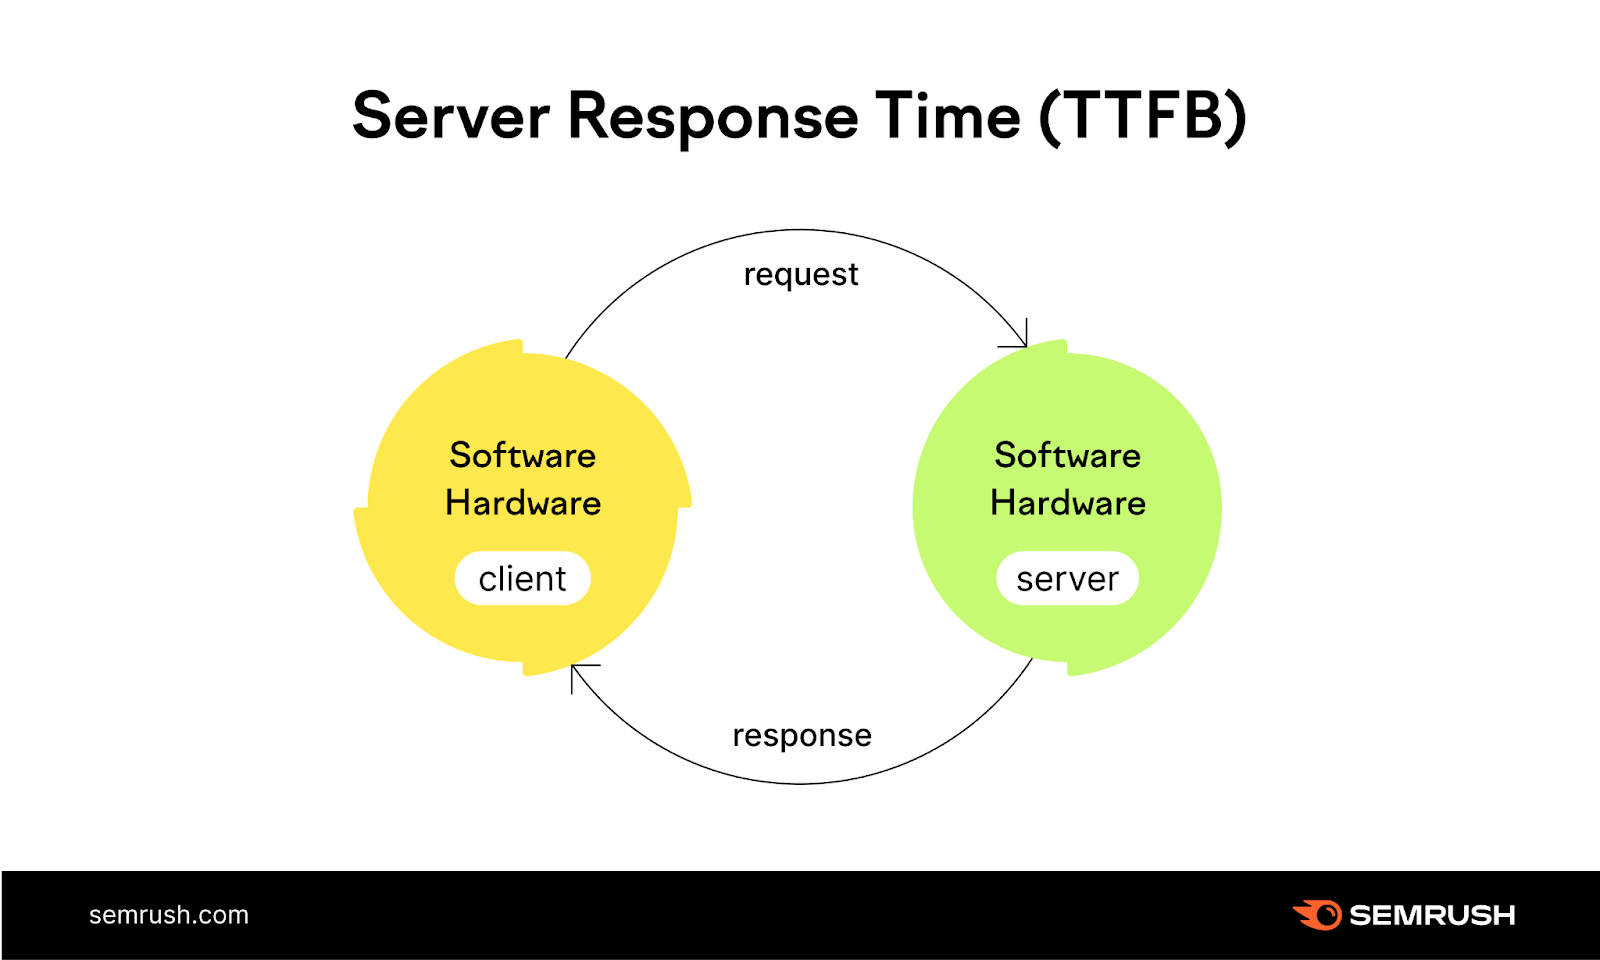 Server response time (TTFB) flow between client and server, including software and hardware interactions.